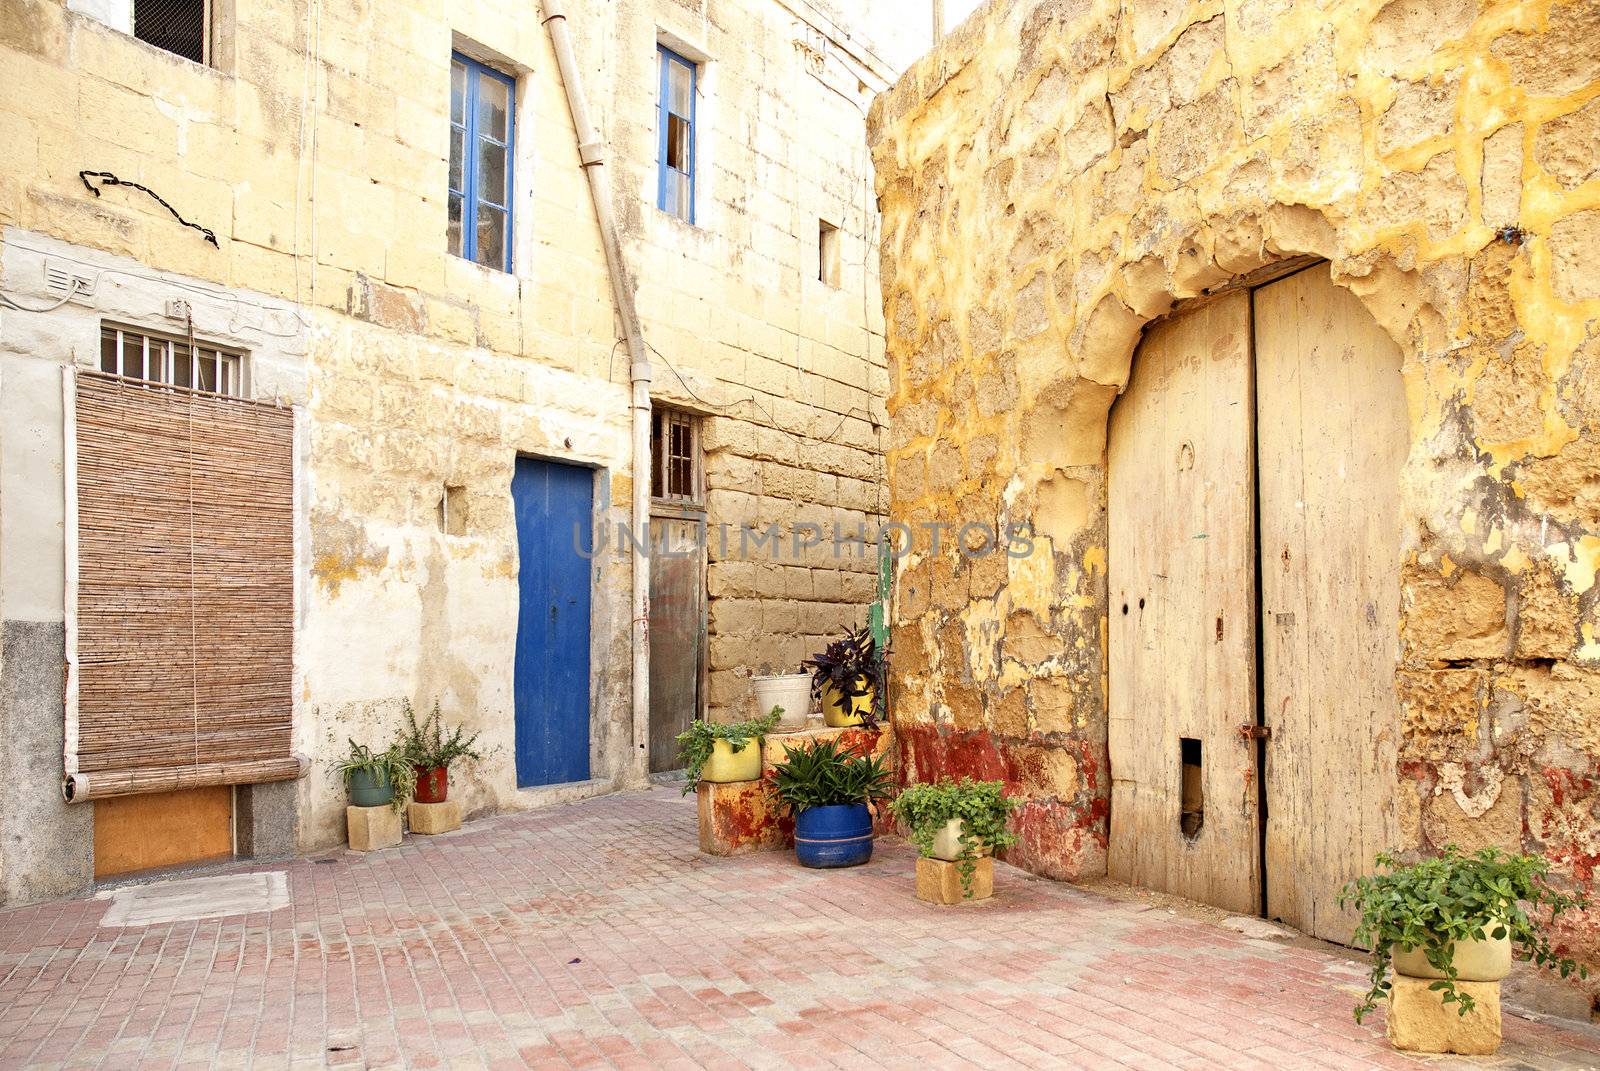 alley in old residential area of valetta malta